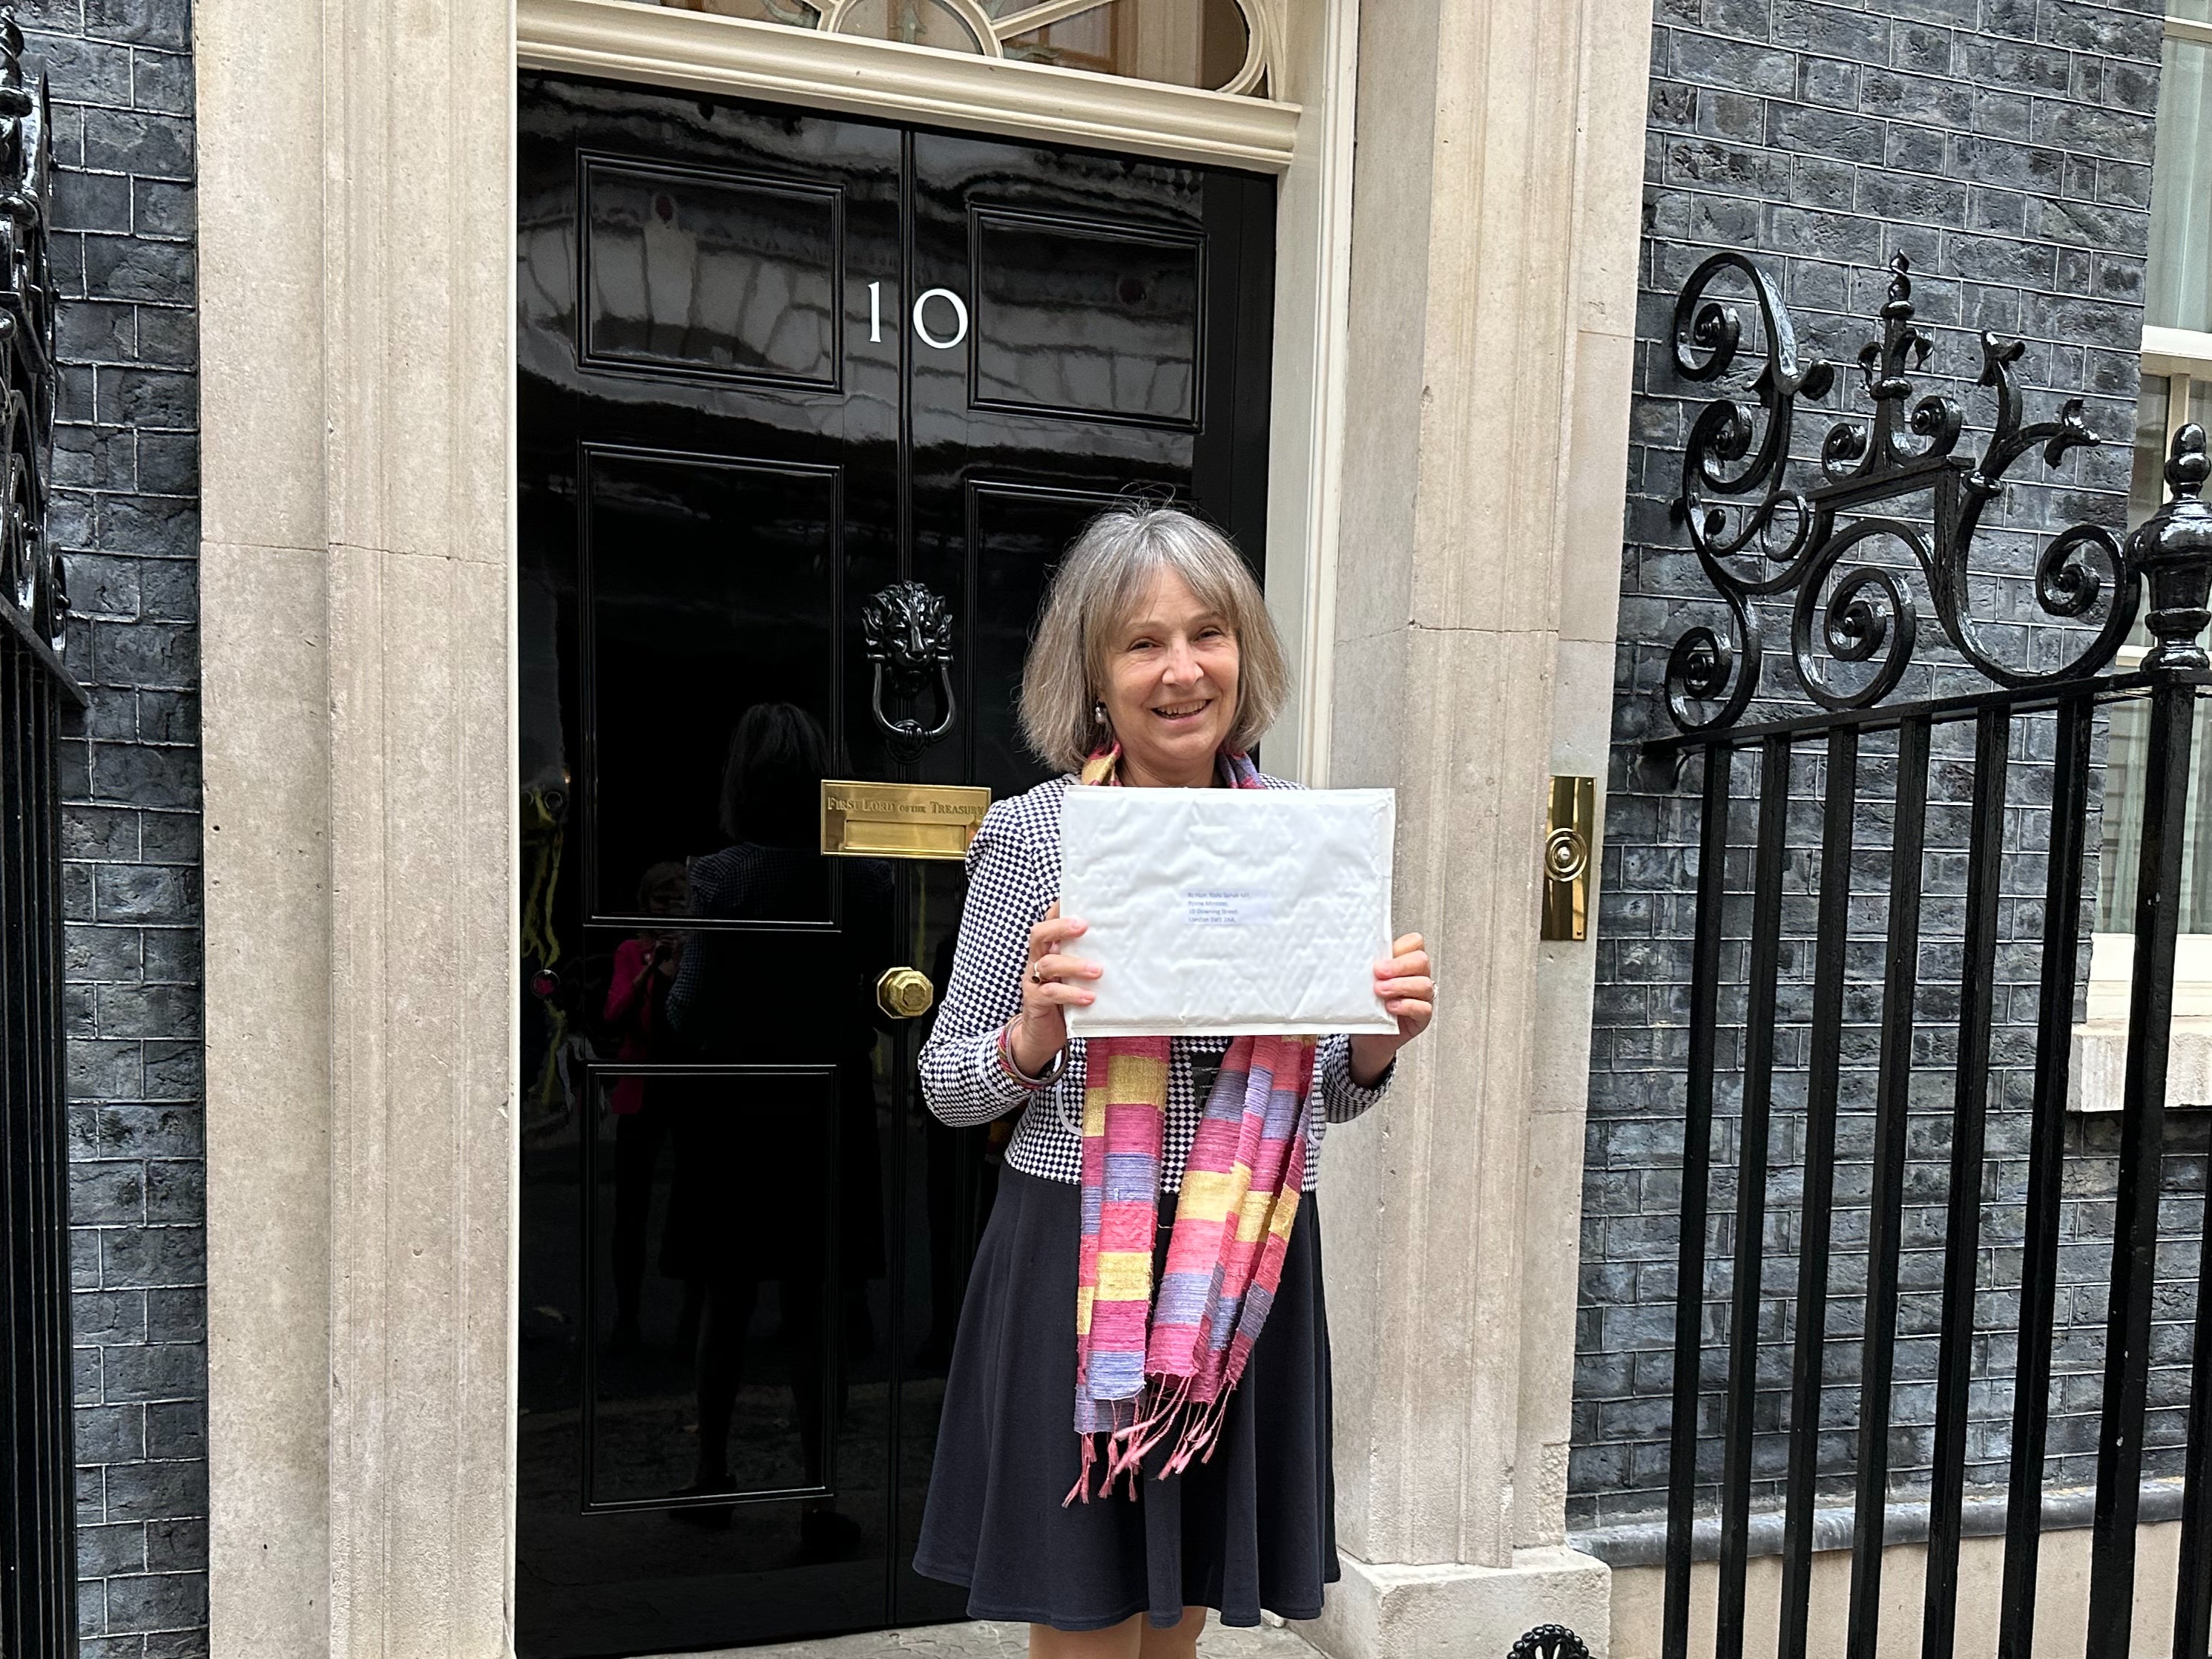 Dr Susan Michaelis delivering a petition to 10 Downing Street